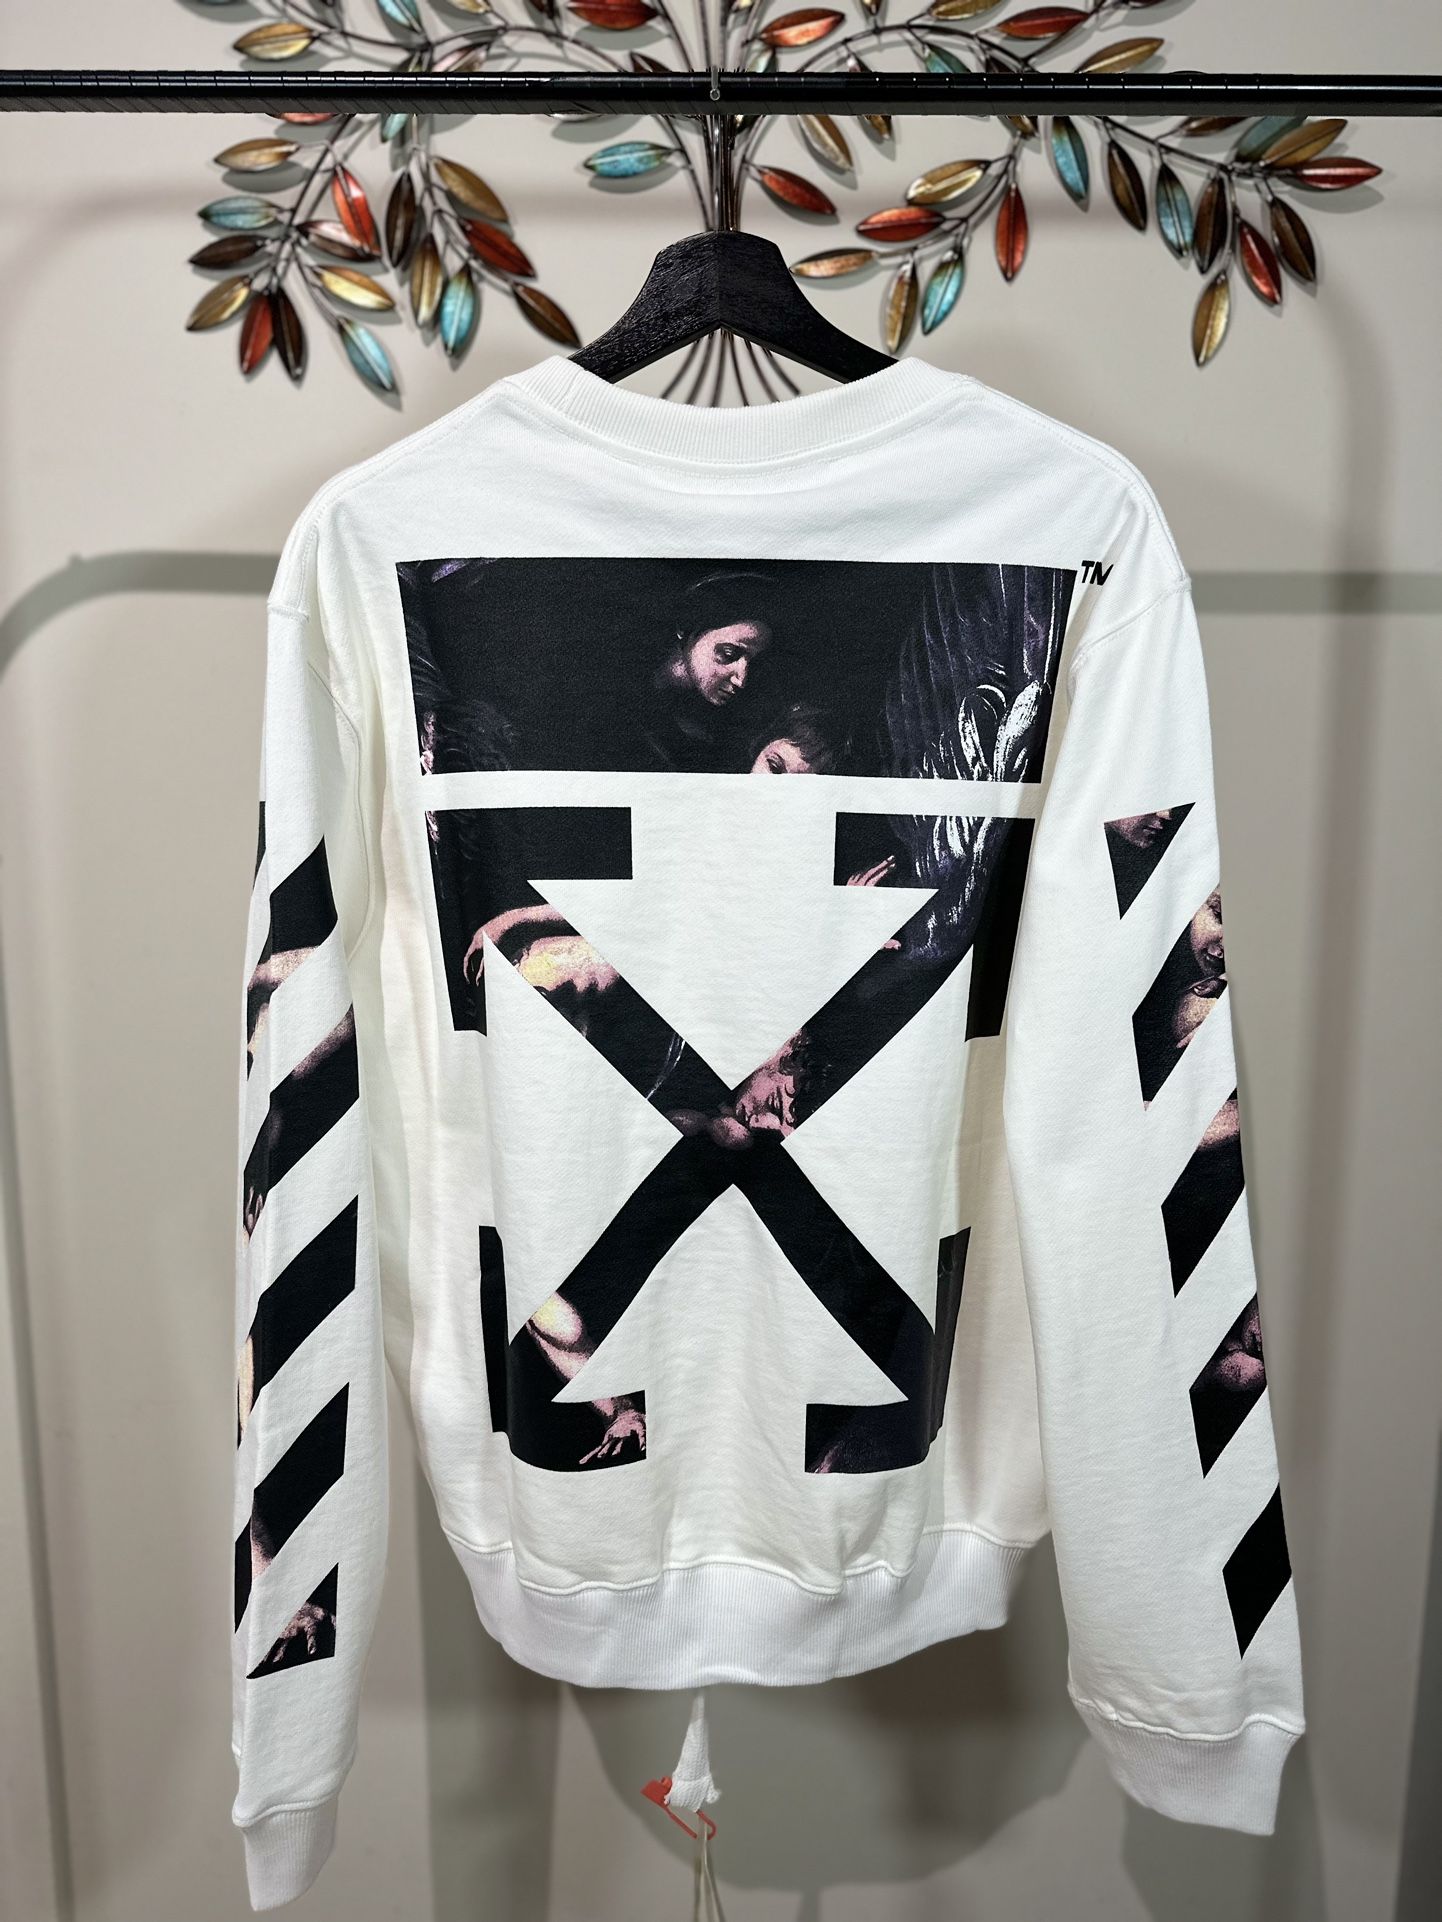 OFF-WHITE CARAVAGGIO ARROWS SWEATSHIRT , Visit Our Profile For More Items Available…